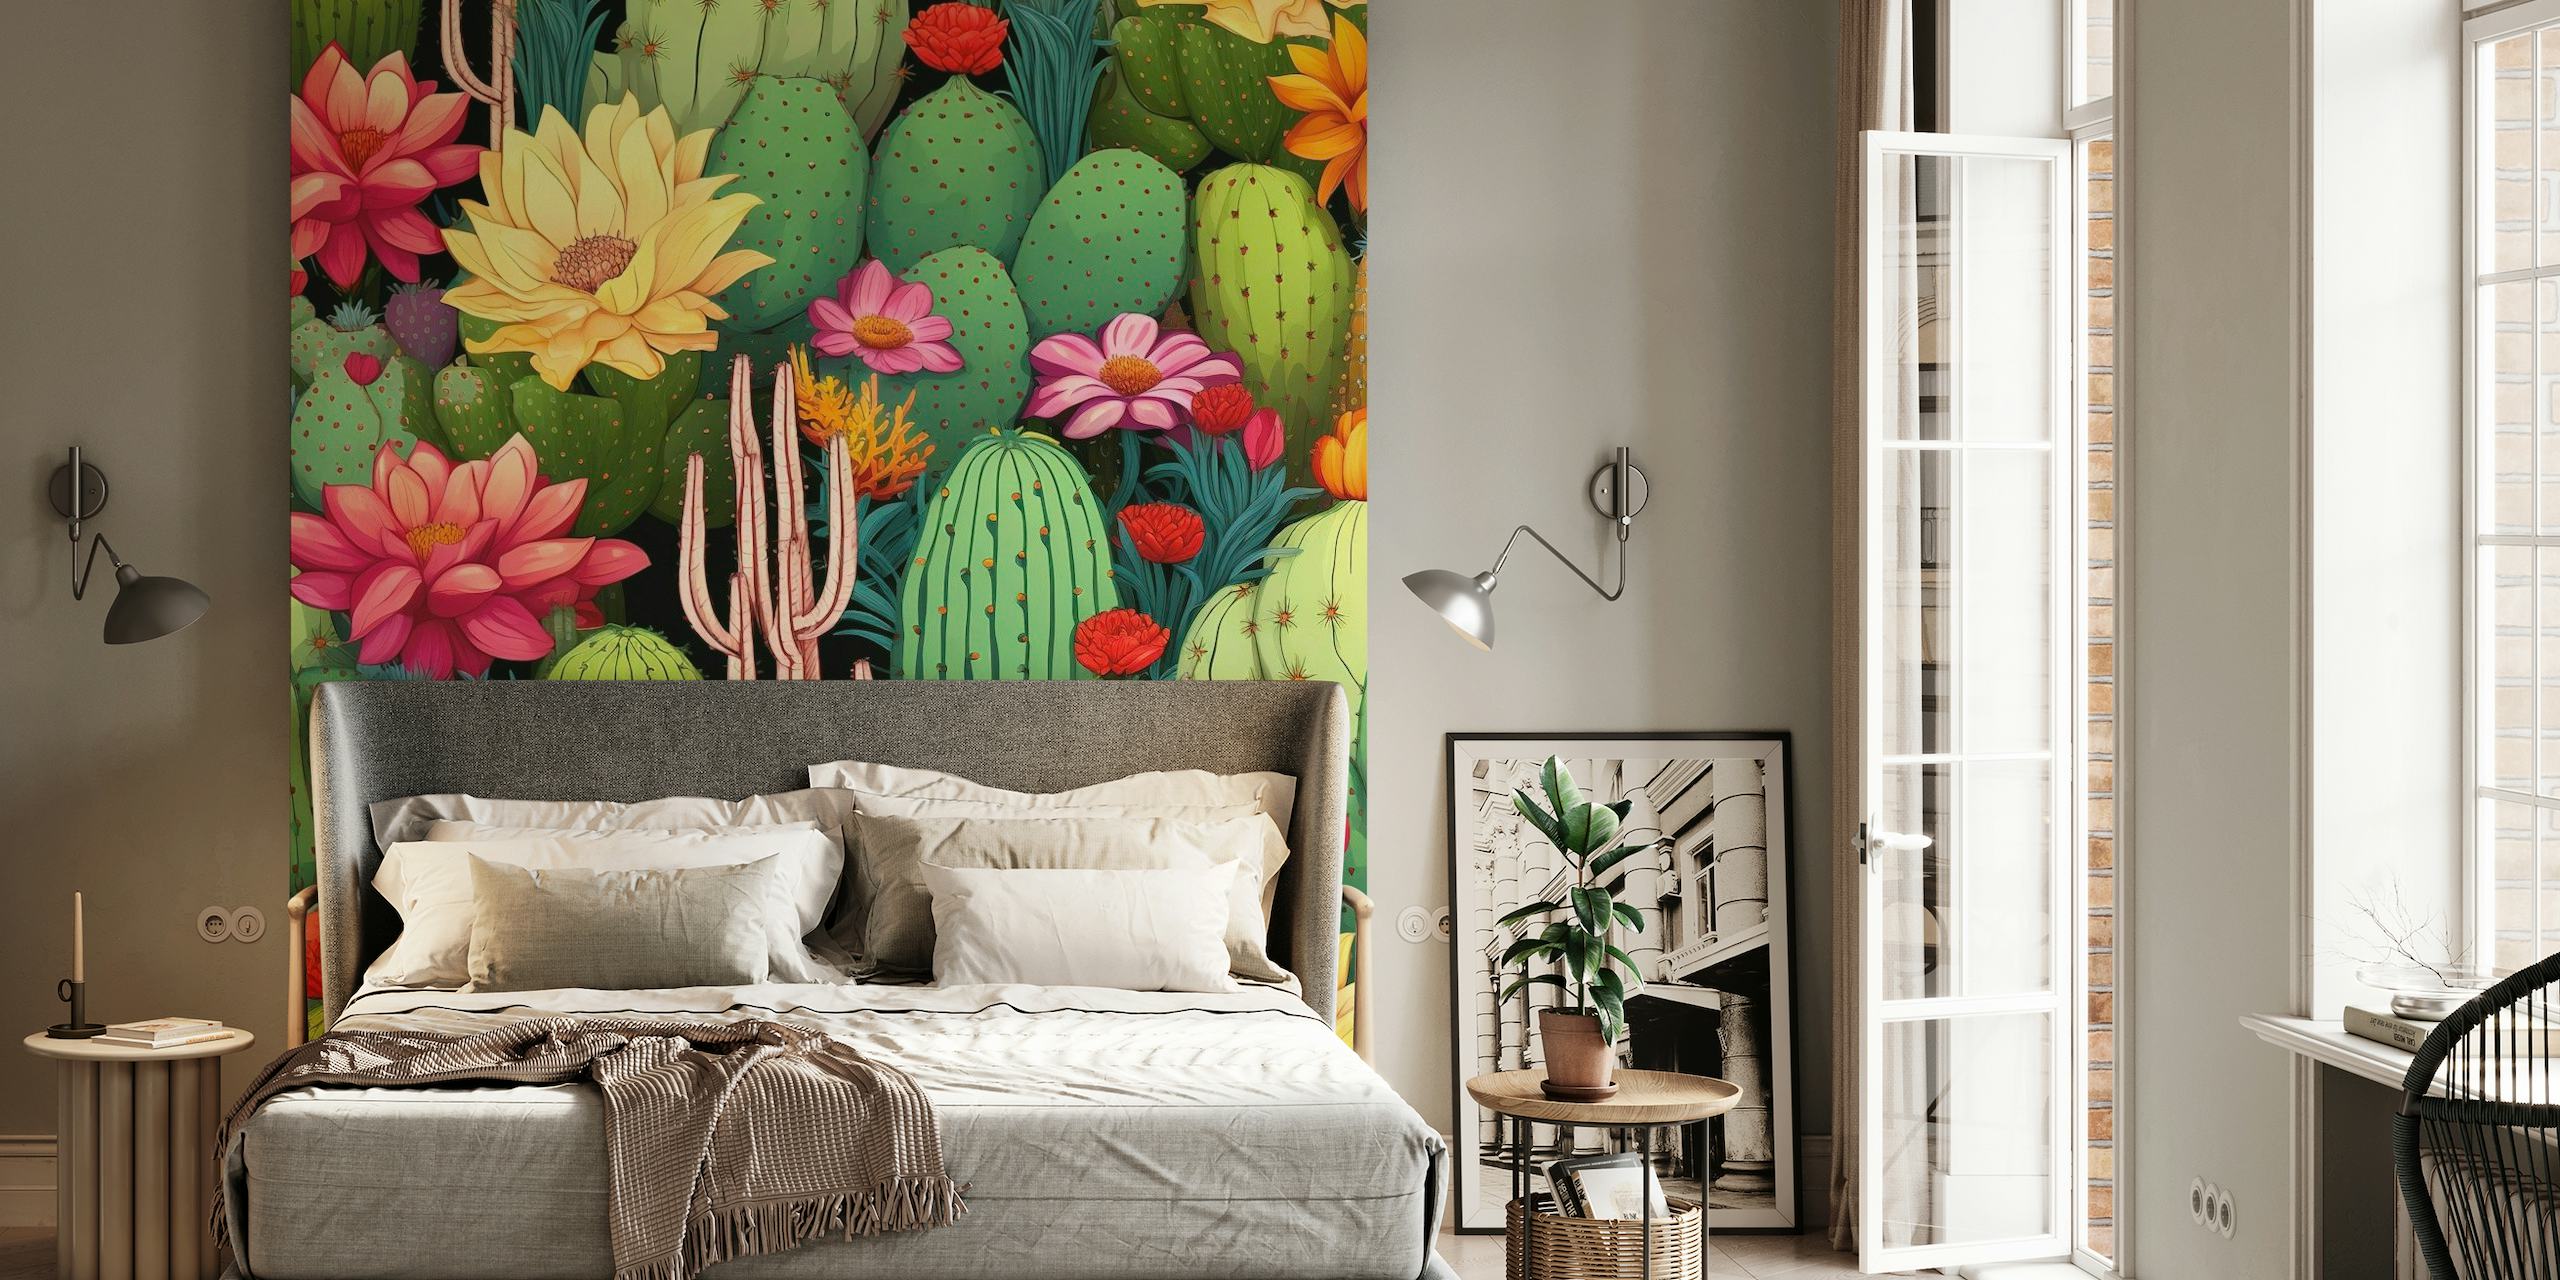 Vivid cacti and flowers wall mural with a variety of succulents in a lively composition